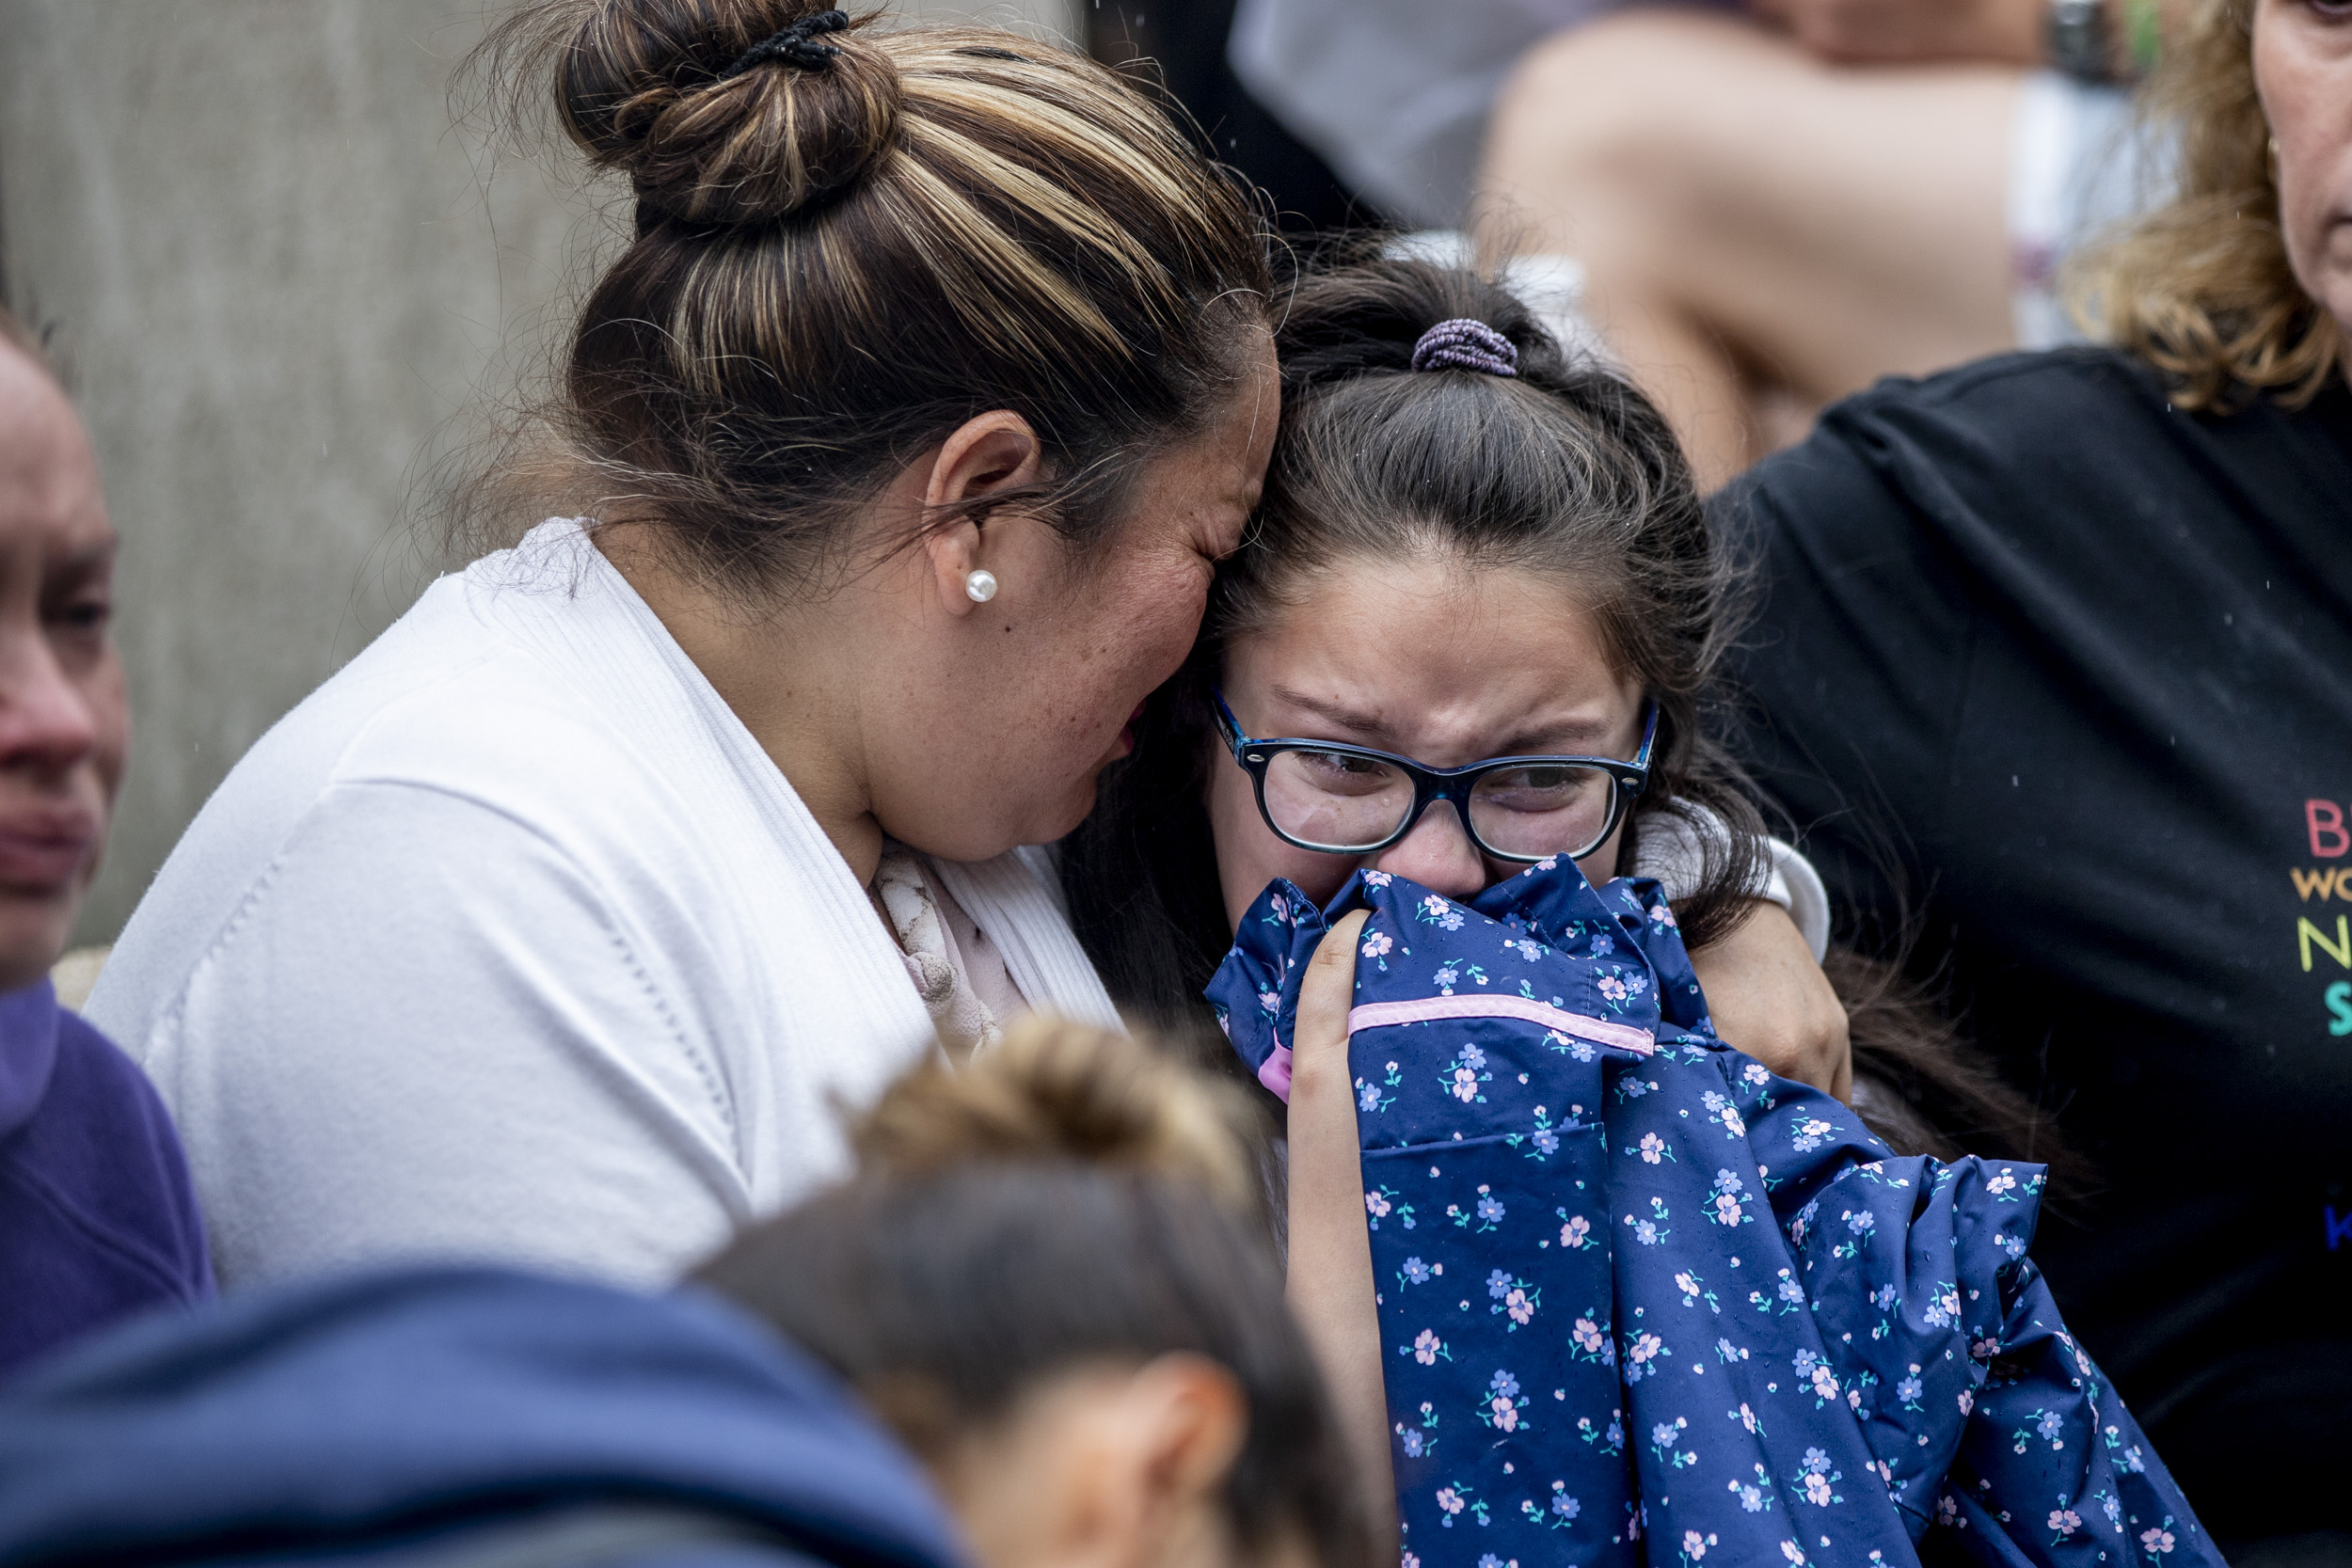 Jose Robles’ wife and daughter, Natalie, 9, embrace as they learn that Robles had been detained by ICE in Tukwila on July 17, 2019. Robles went to the ICE offices to request a stay of removal but was arrested instead. (Photo by Dorothy Edwards/Crosscut)